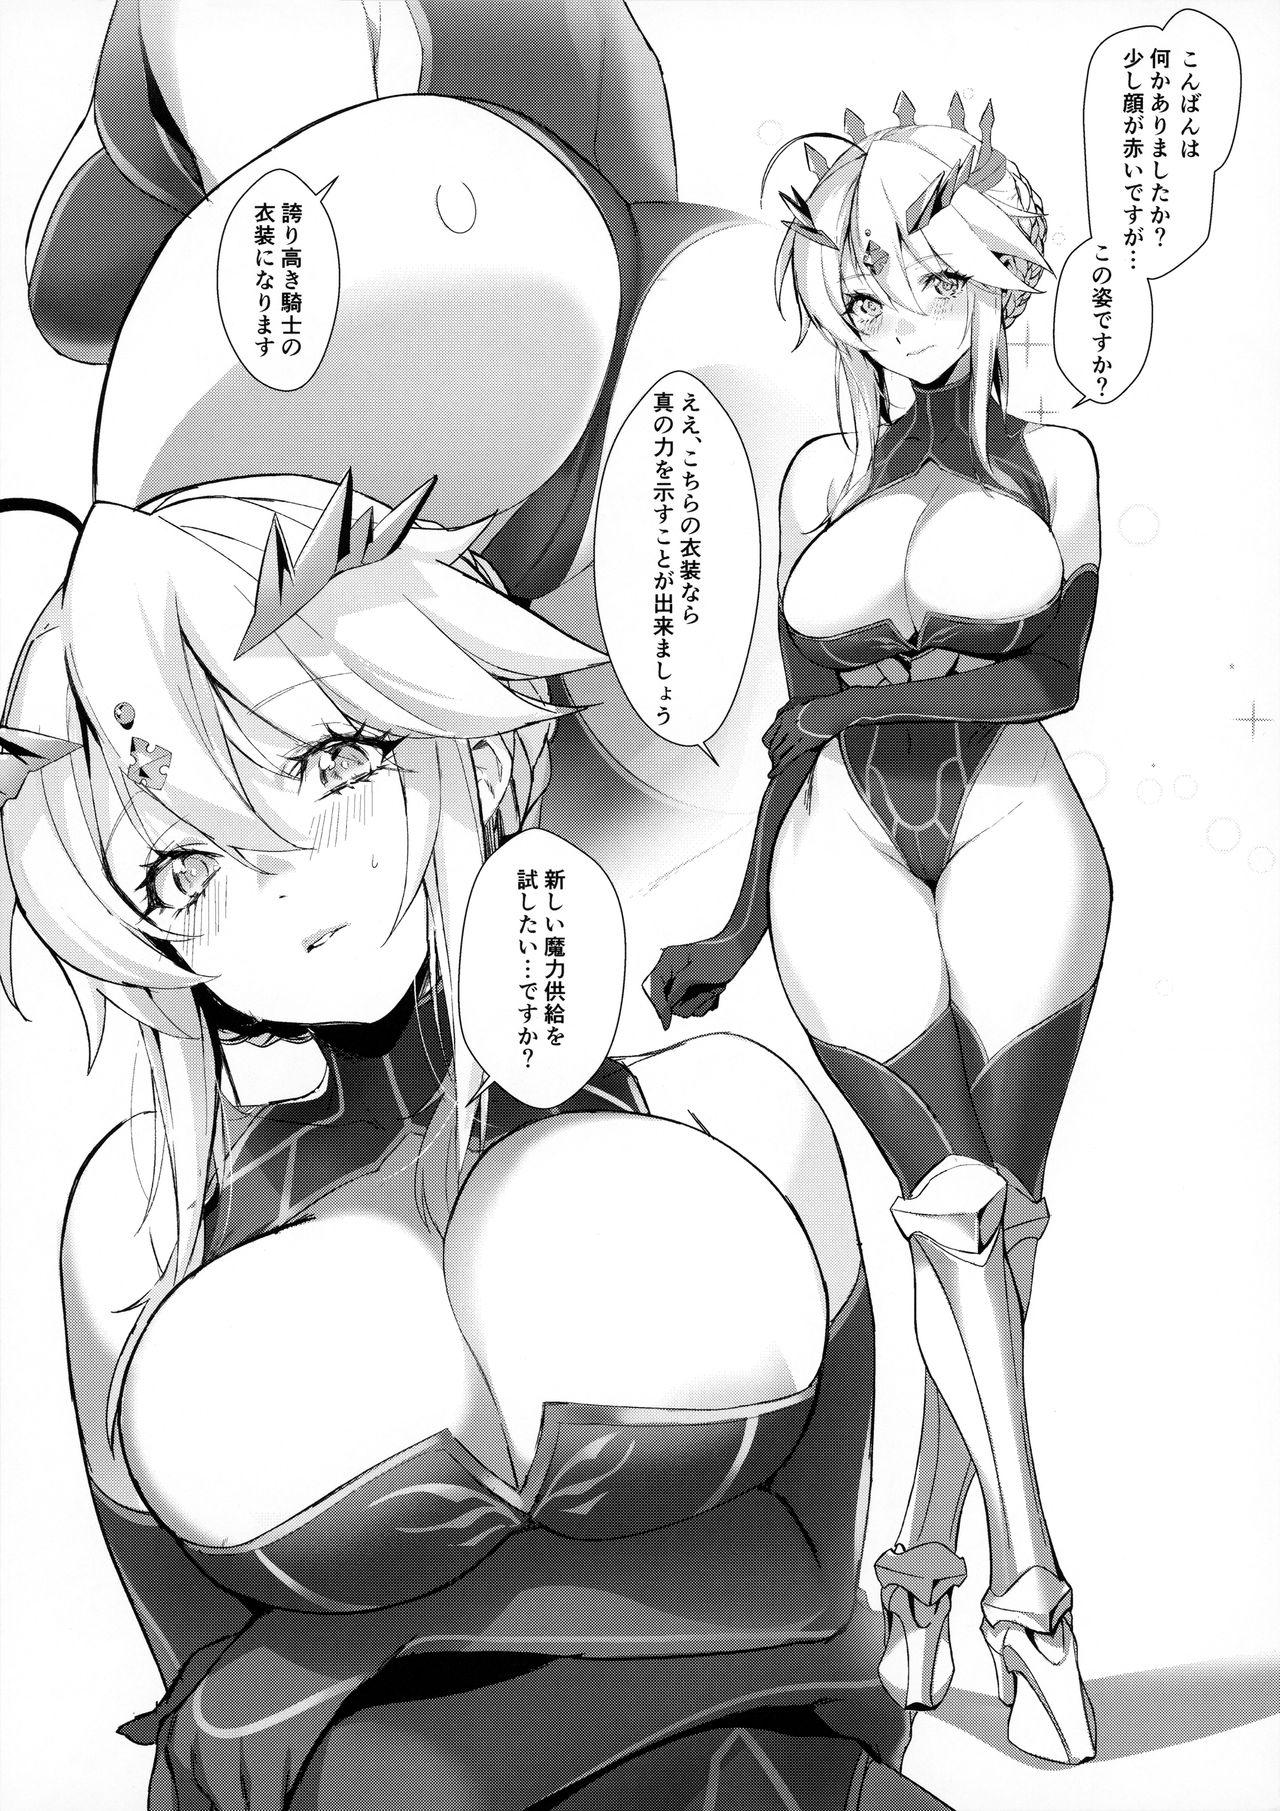 Exhibitionist Onegai - Fate grand order Spy Camera - Page 2